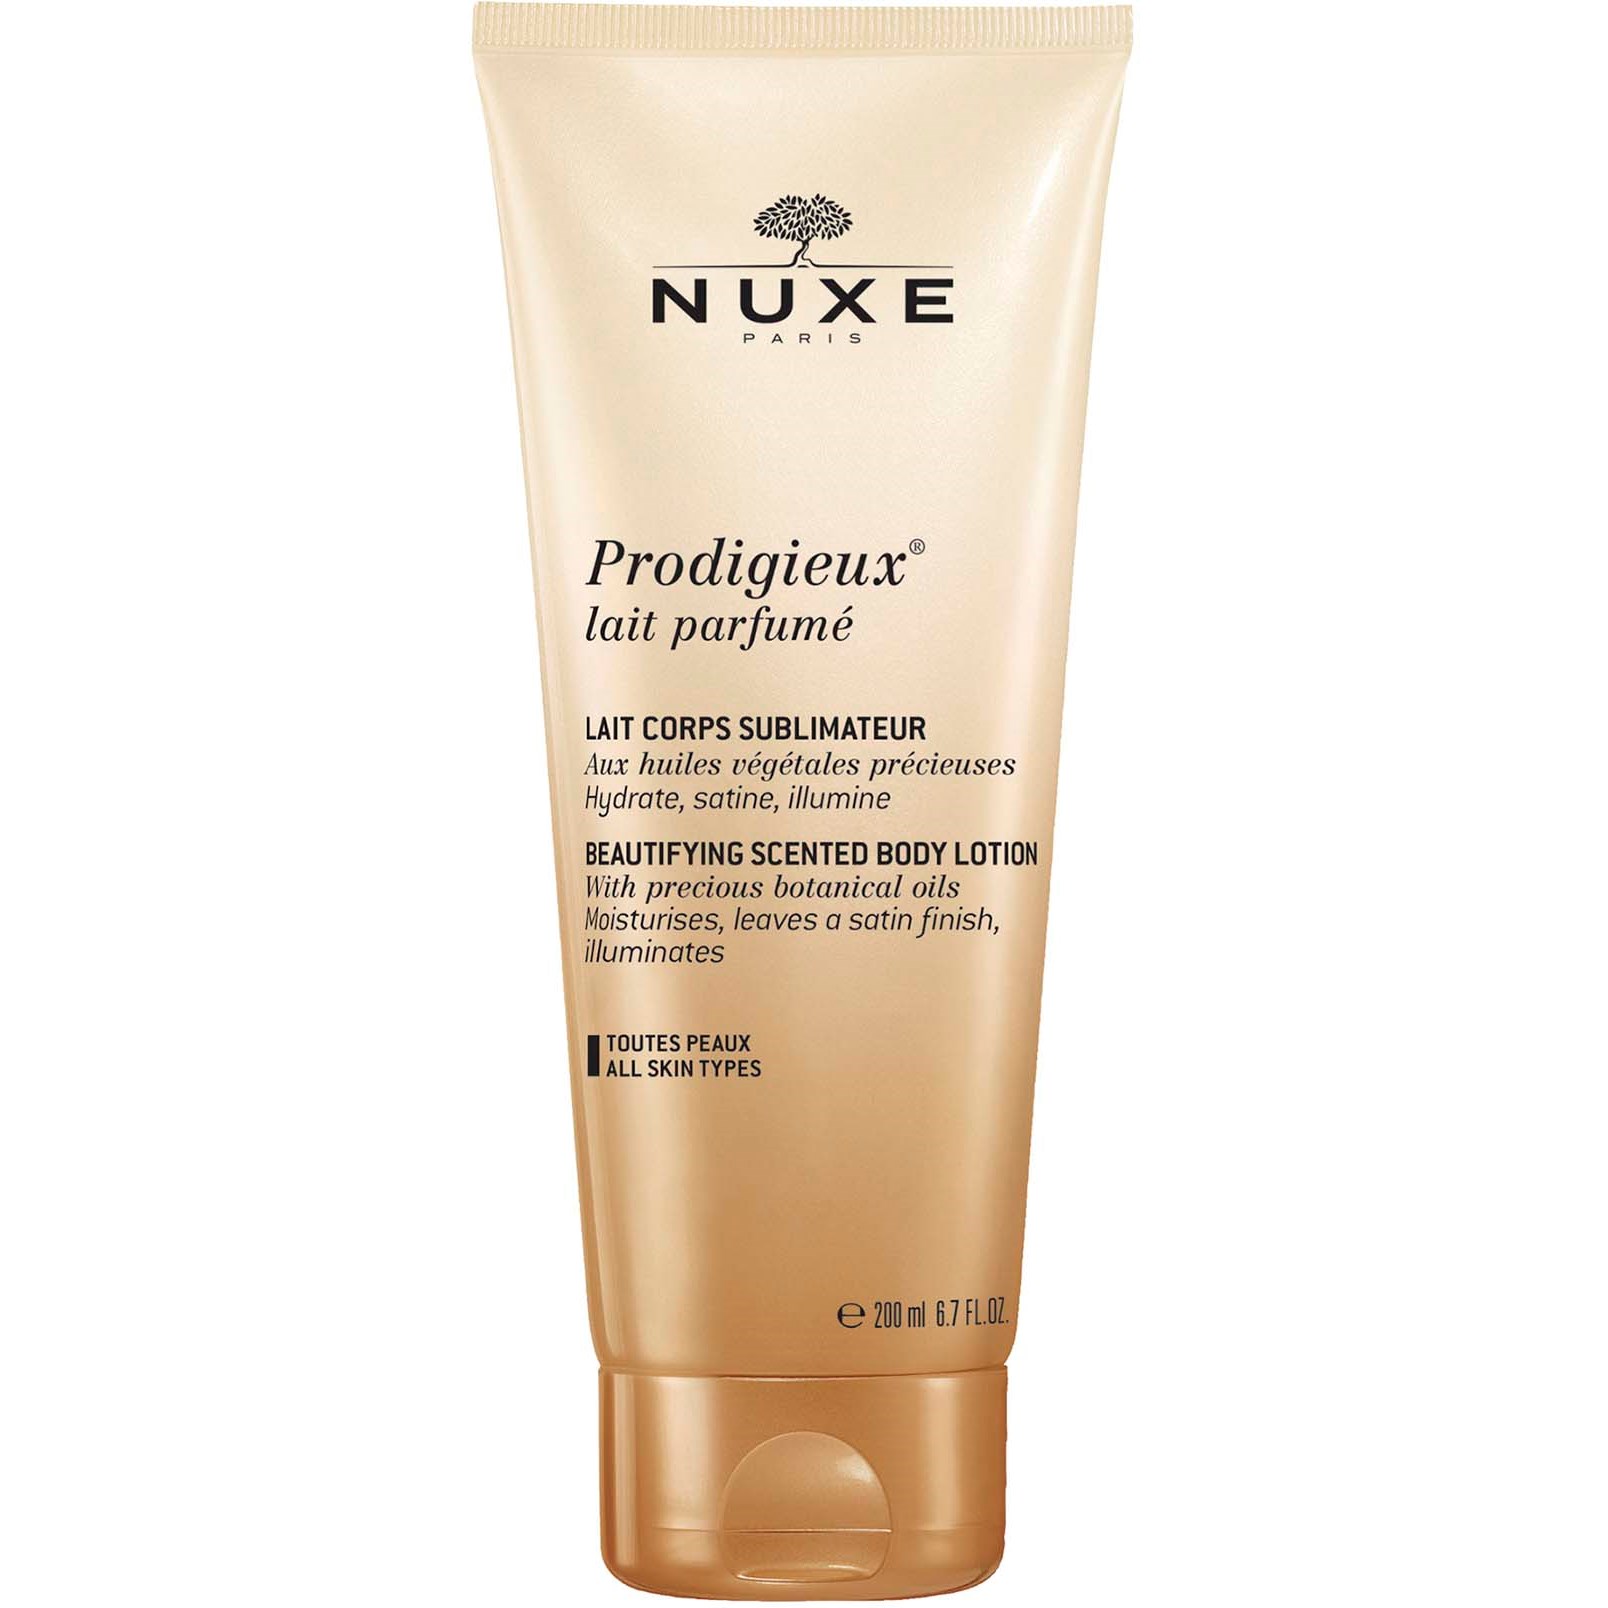 Nuxe Prodigieux Beautifyng Scented Body Lotion 200 ml